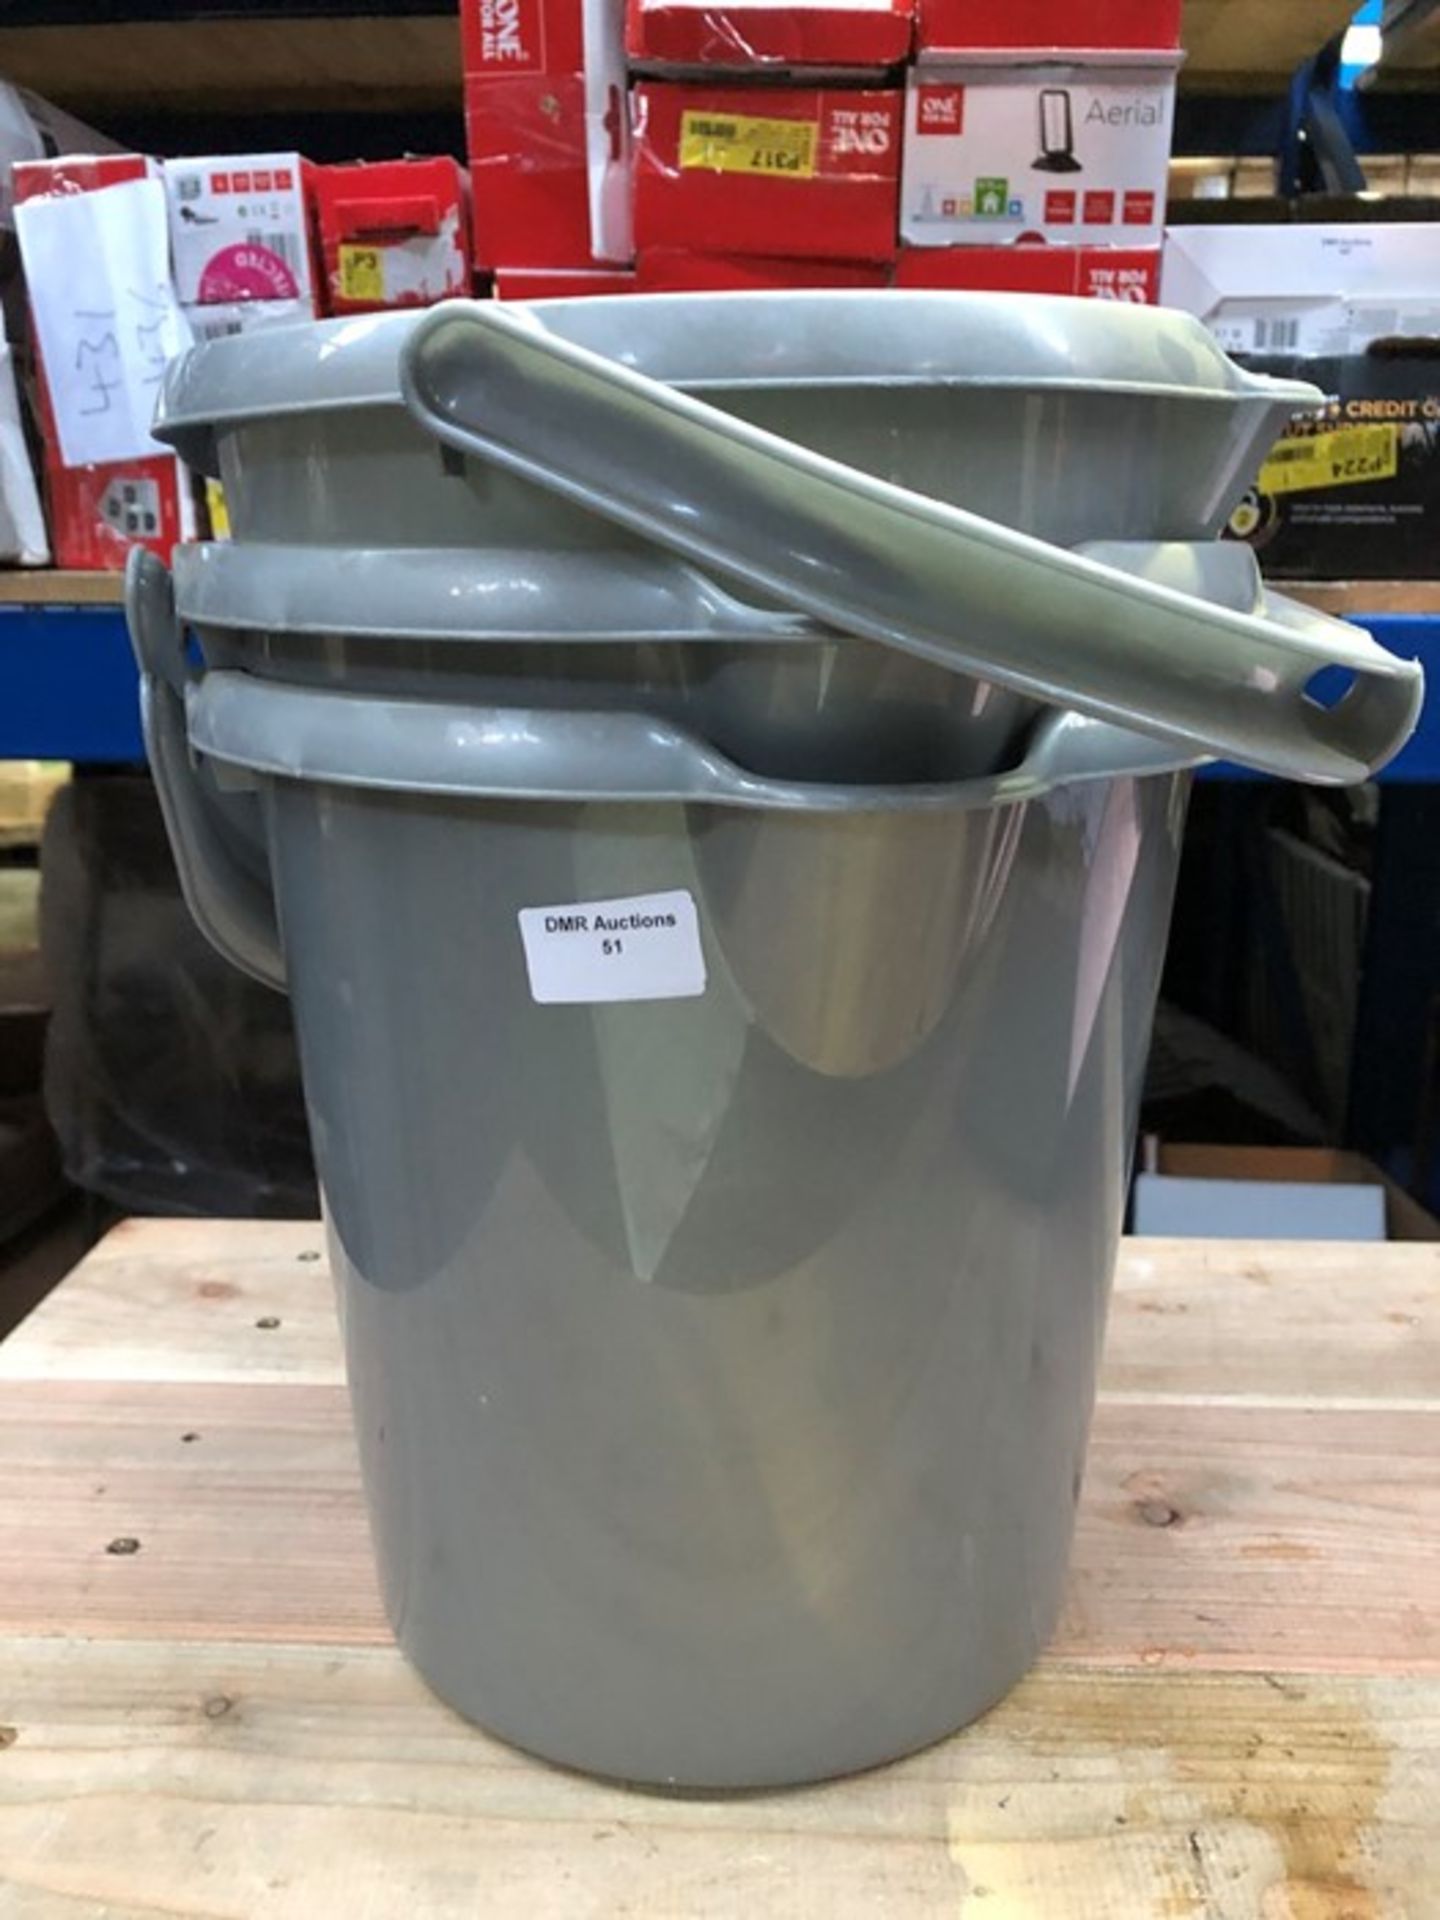 1 LOT TO CONTAIN 3 BUCKETS - GREY (PUBLIC VIEWING AVAILABLE)